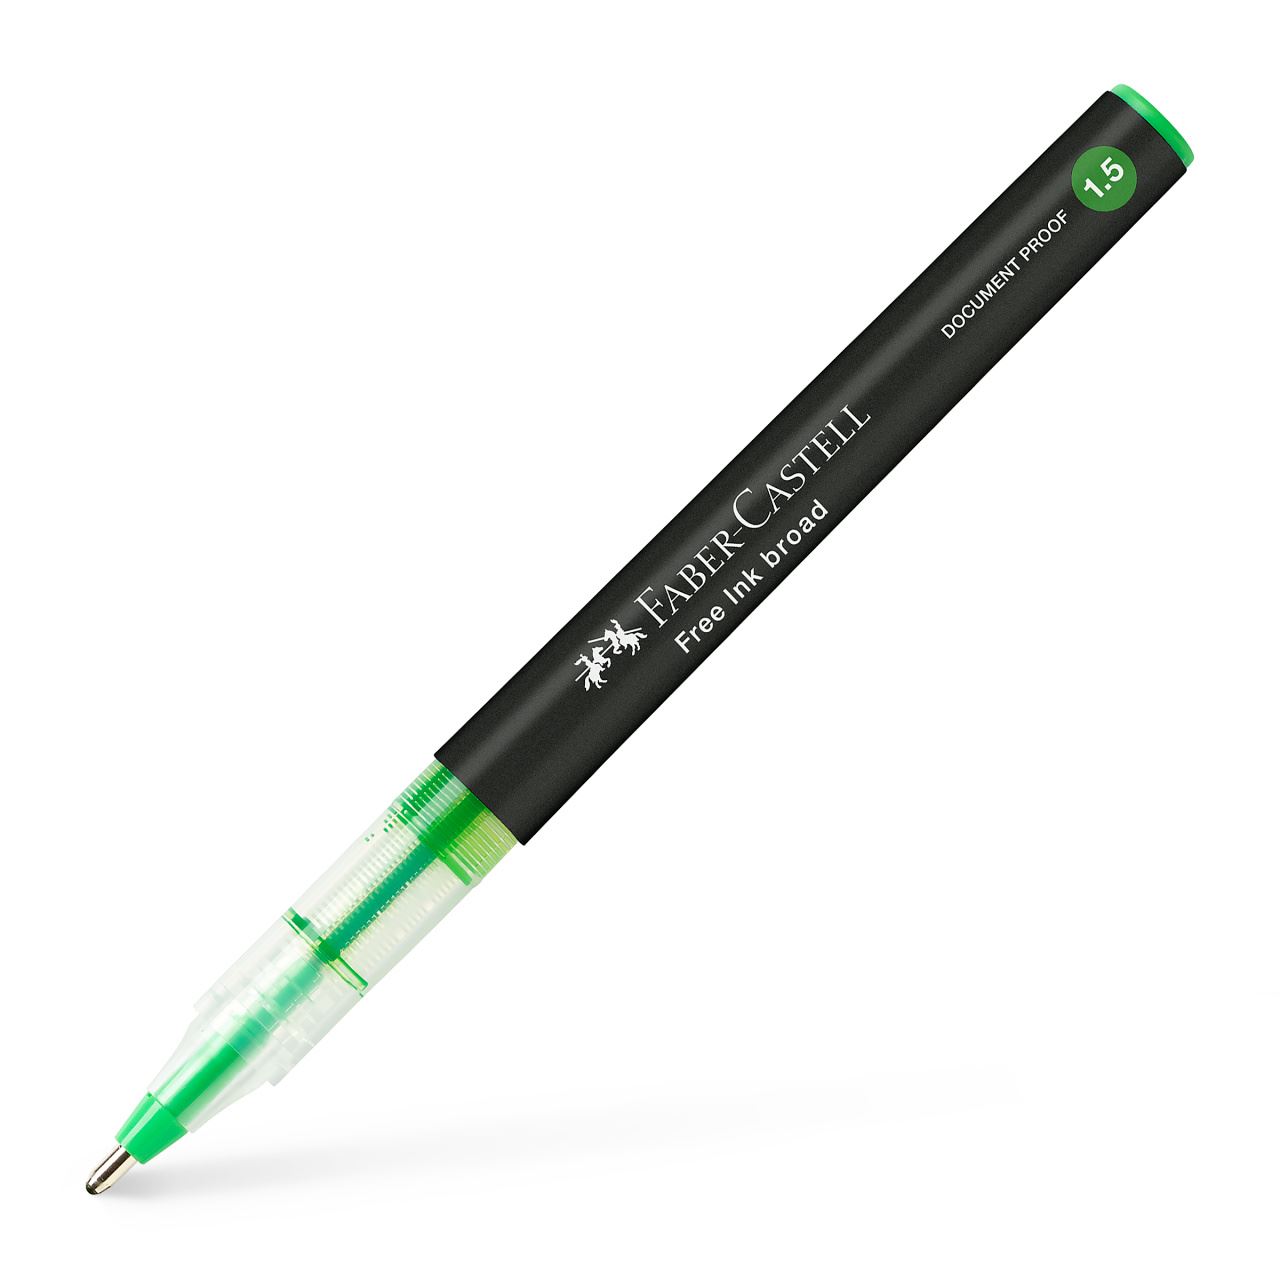 Faber-Castell - Free Ink rollerball, 1.5 mm, verde chiaro